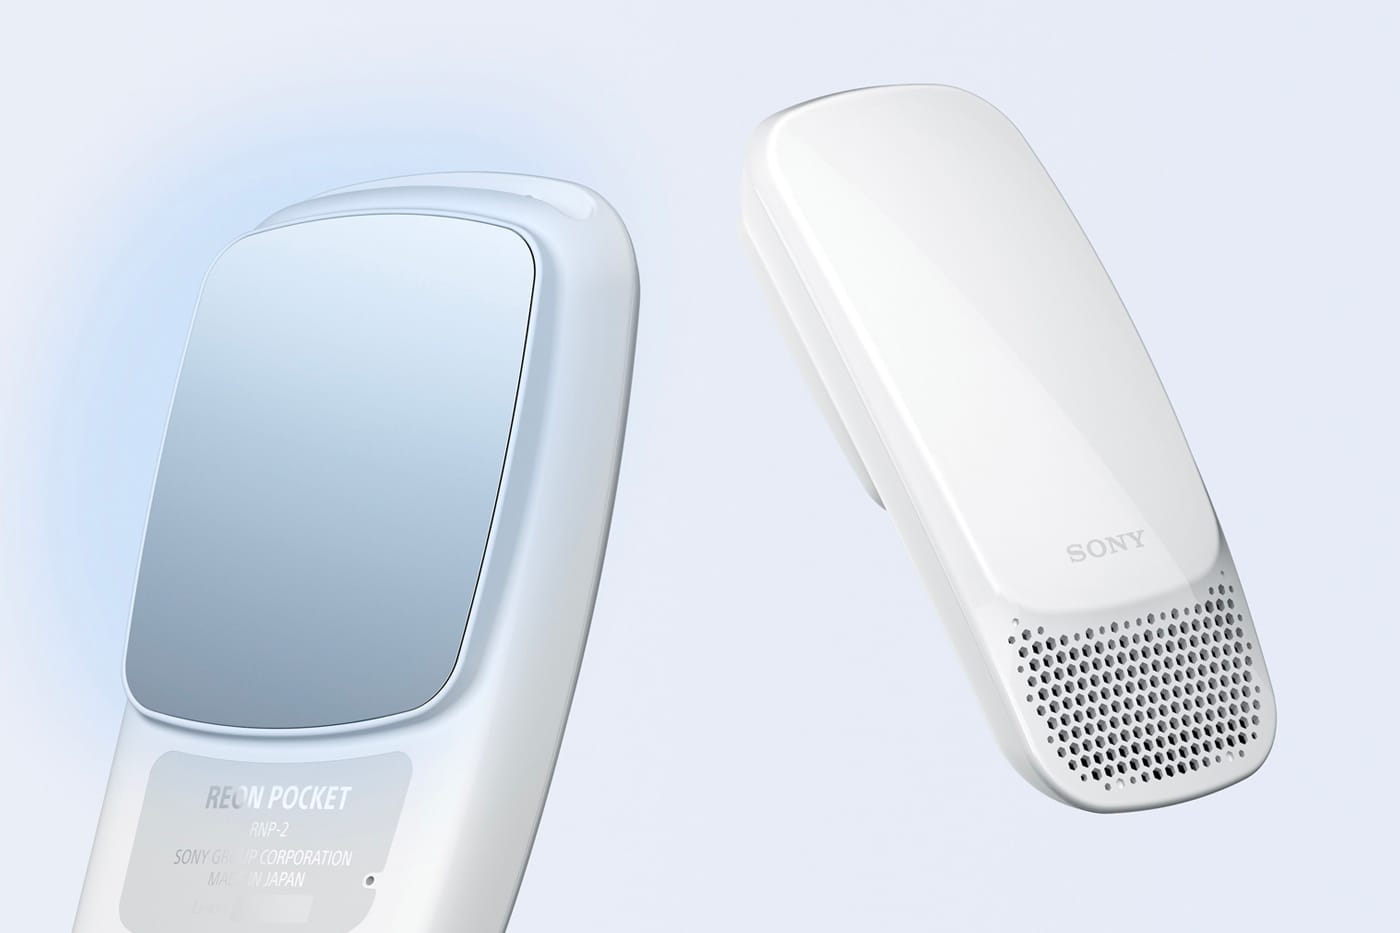 Sony Reon Pocket 2 Wearable Air Conditioner Update | HYPEBEAST